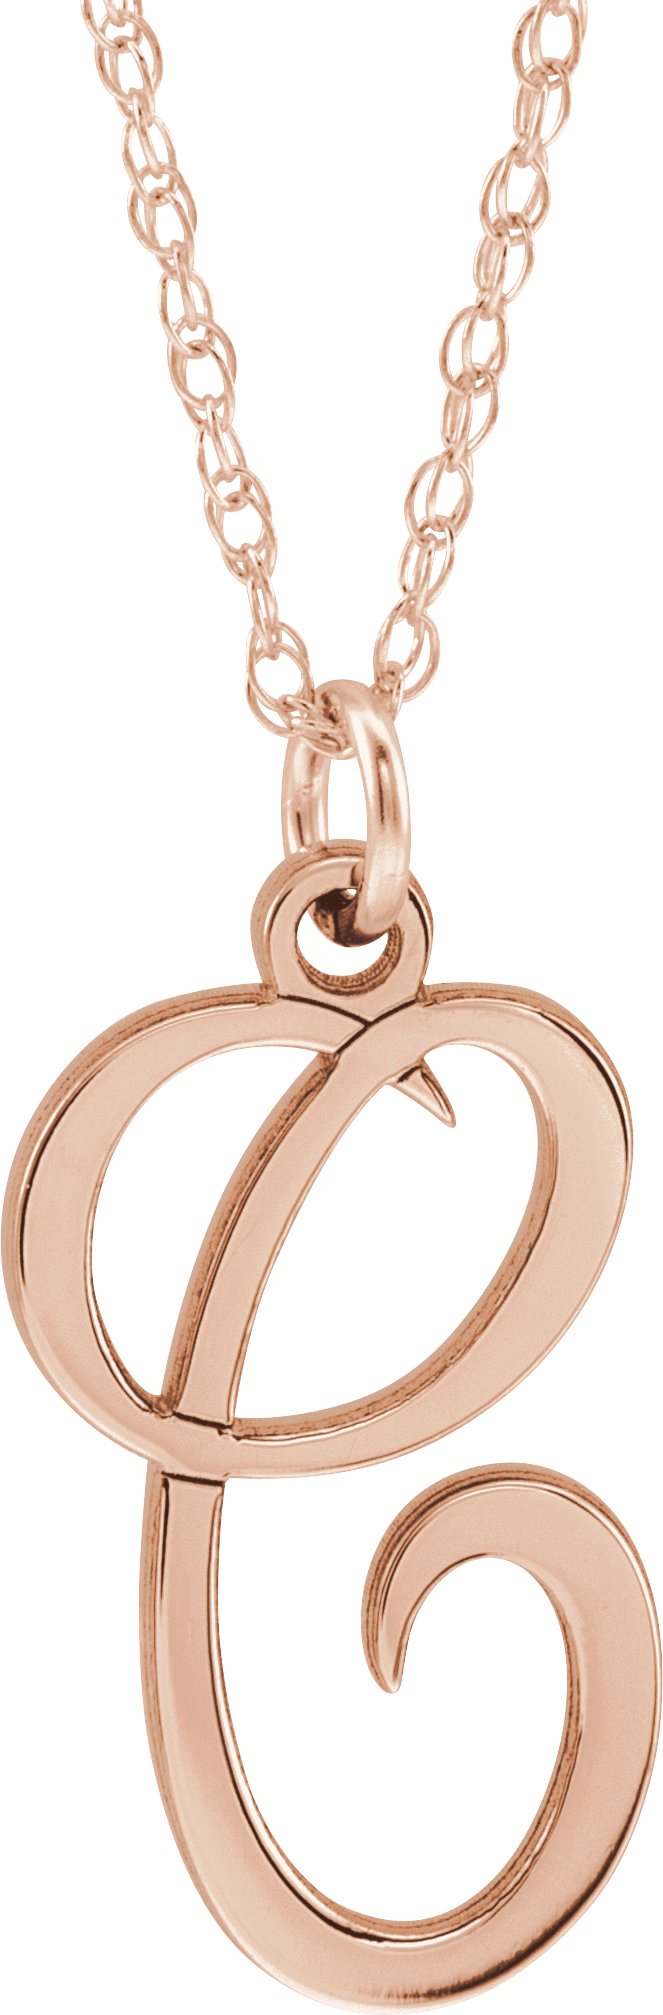 14K Rose Gold-Plated Sterling Silver Script Initial C 16-18" Necklace